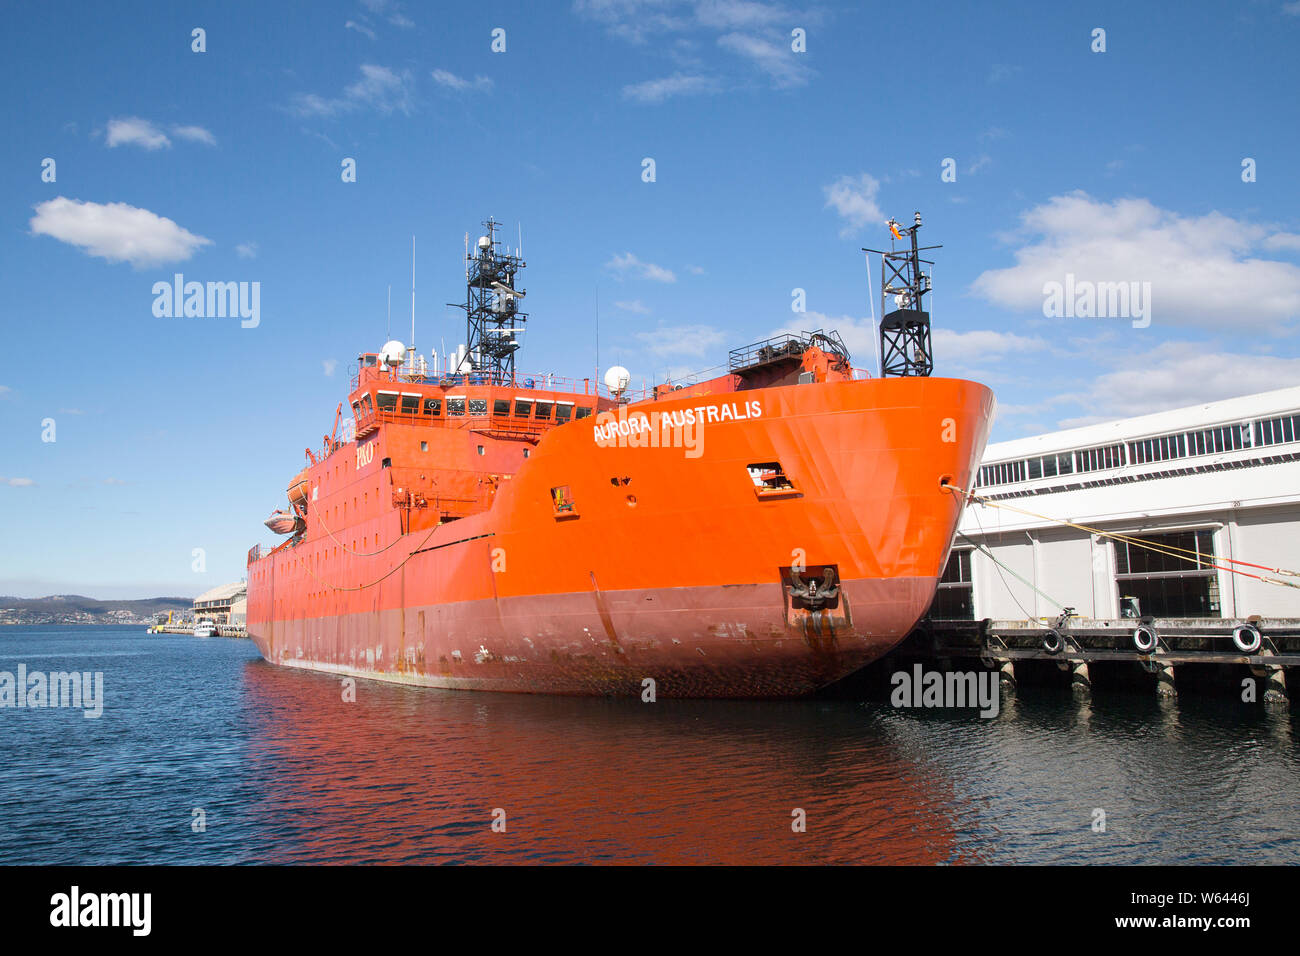 Hobart, Tasmania: April, 2019: Ice-Breaker Aurora Australis is owned by P&O Maritime Services. She cruises Antarctic waters conducting research. Stock Photo